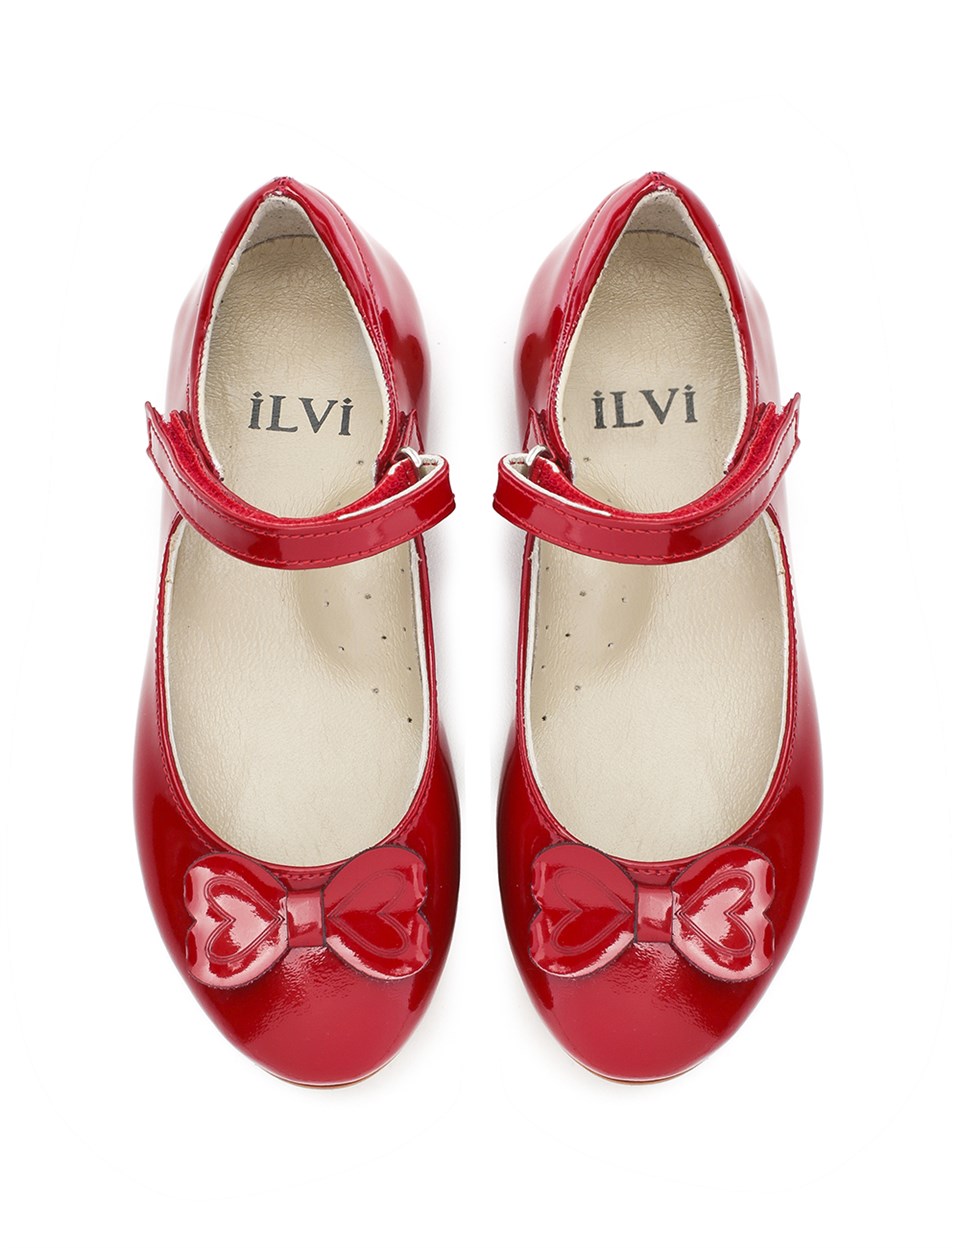 girls red patent leather shoes